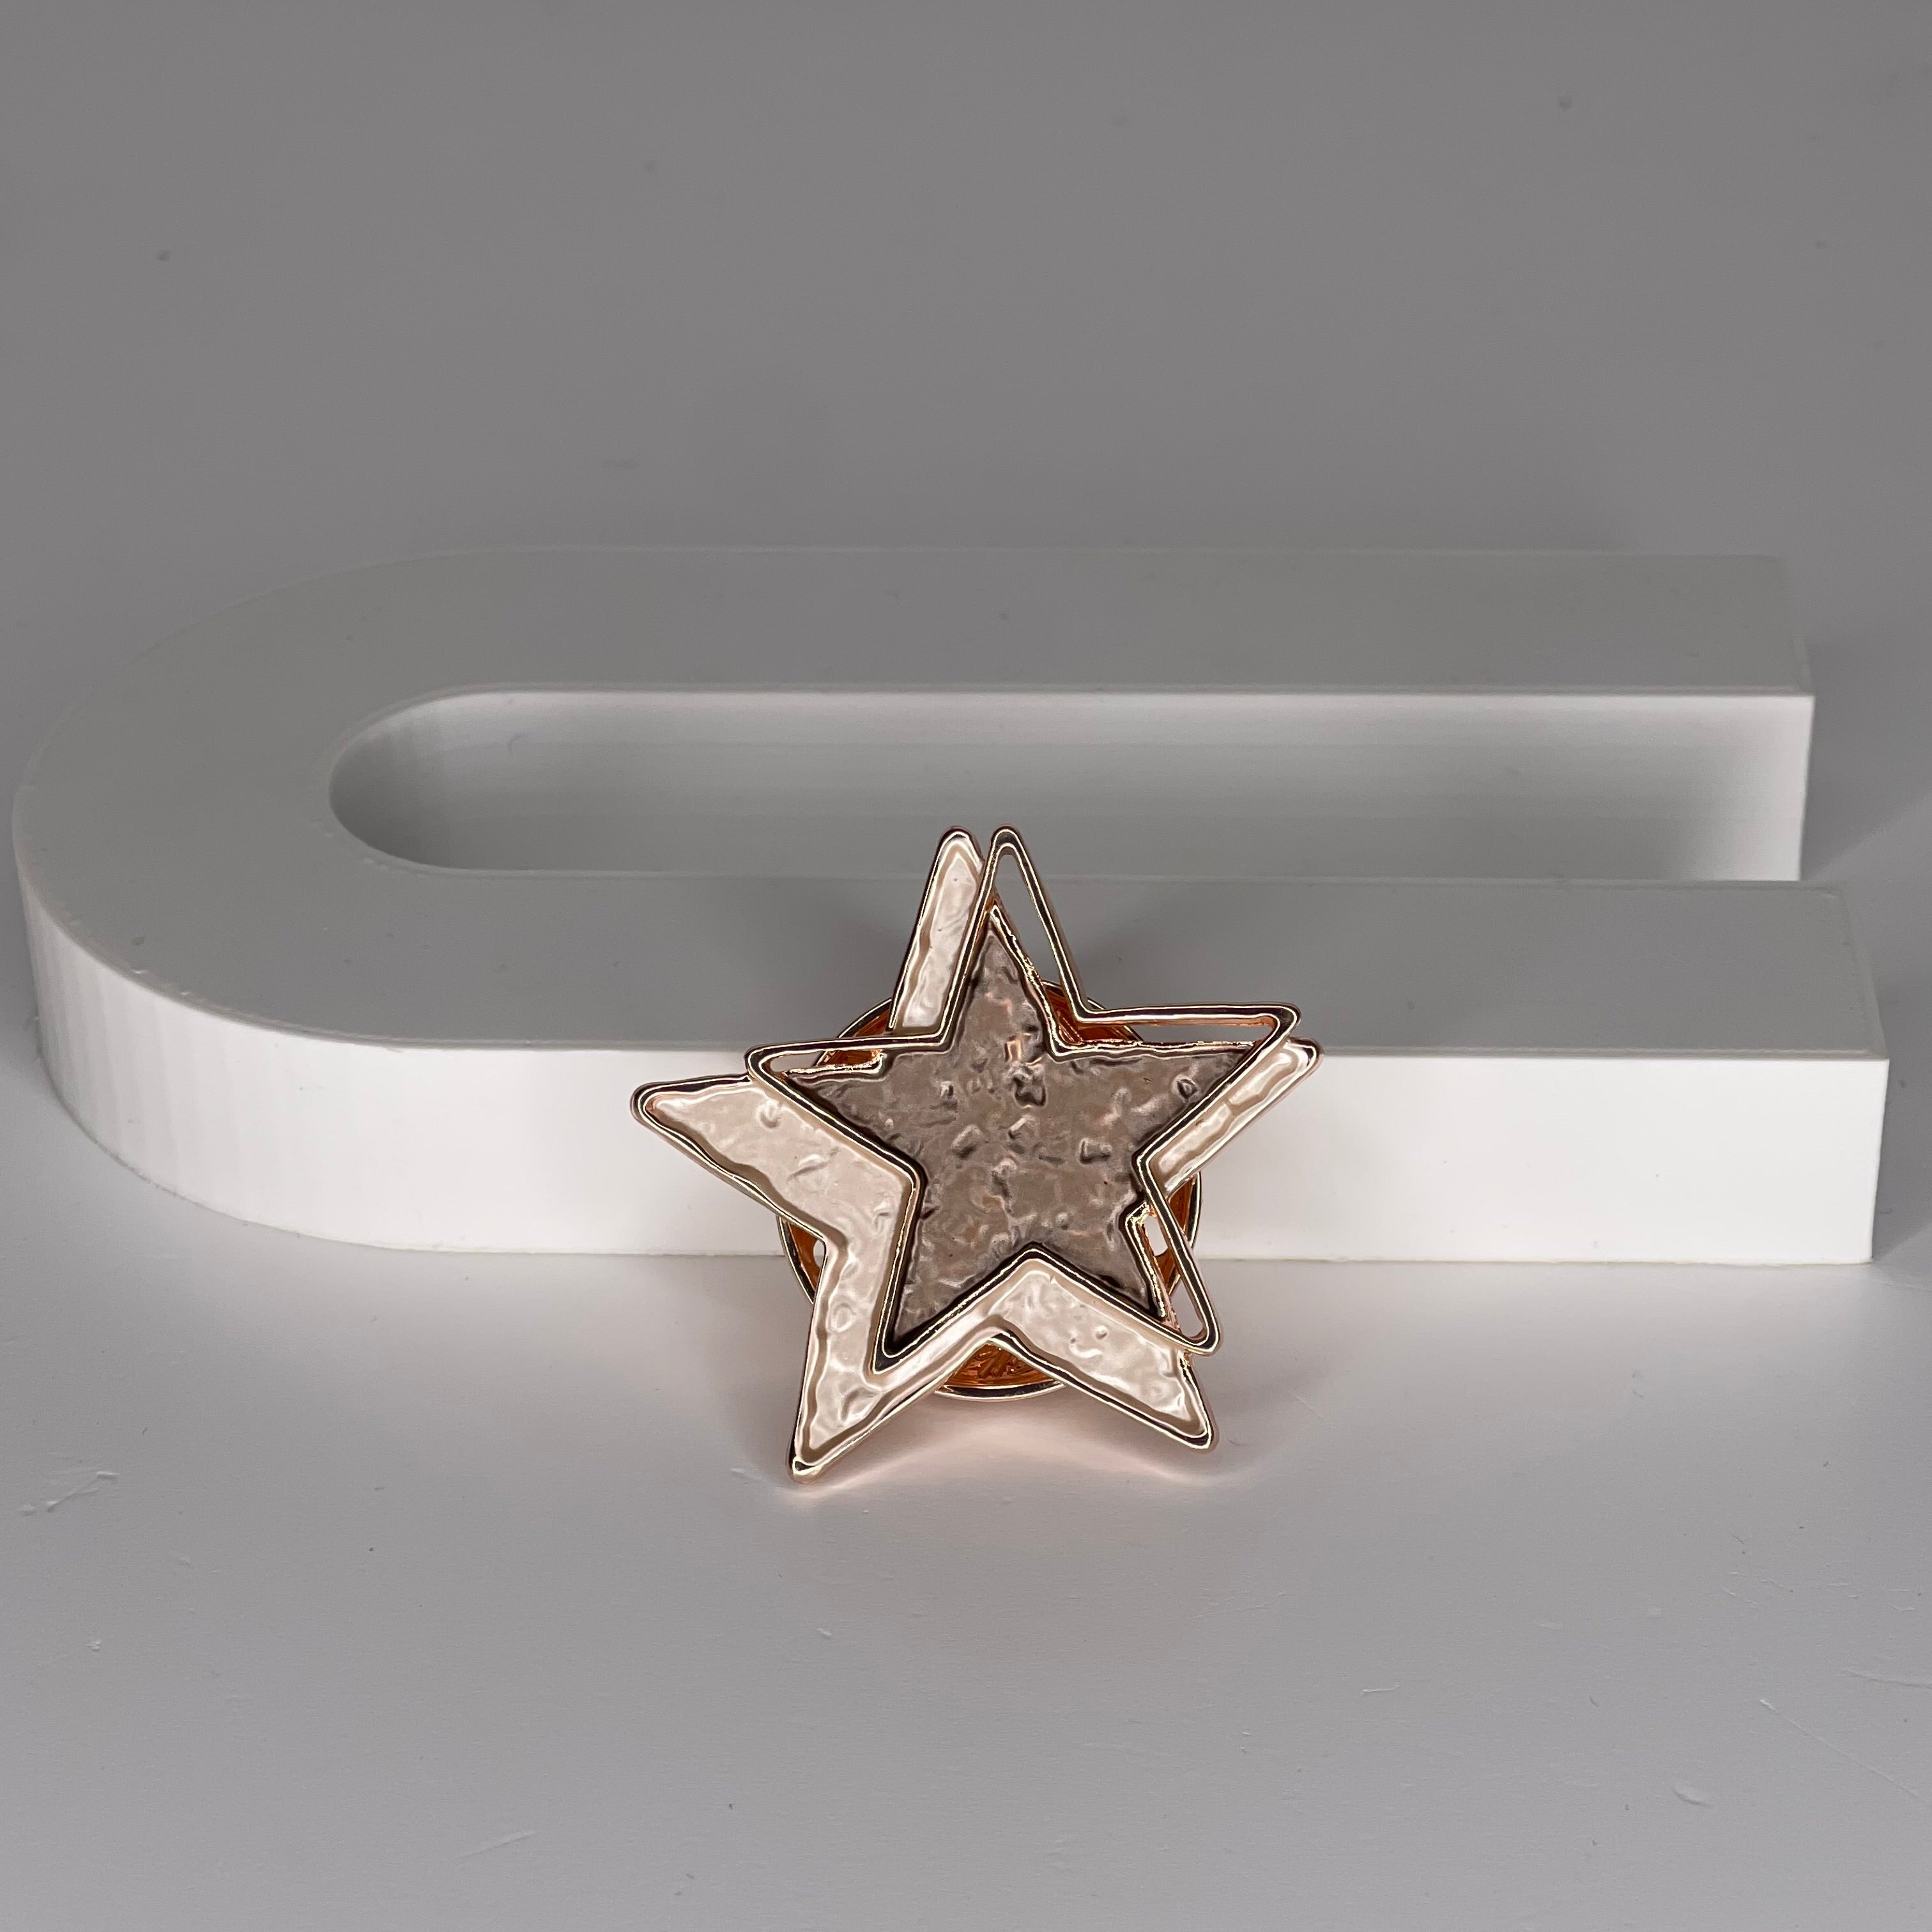 Magnetic brooch & scarf clip  - 'double star' design in shades of shiny rose gold, mushroom and champagne